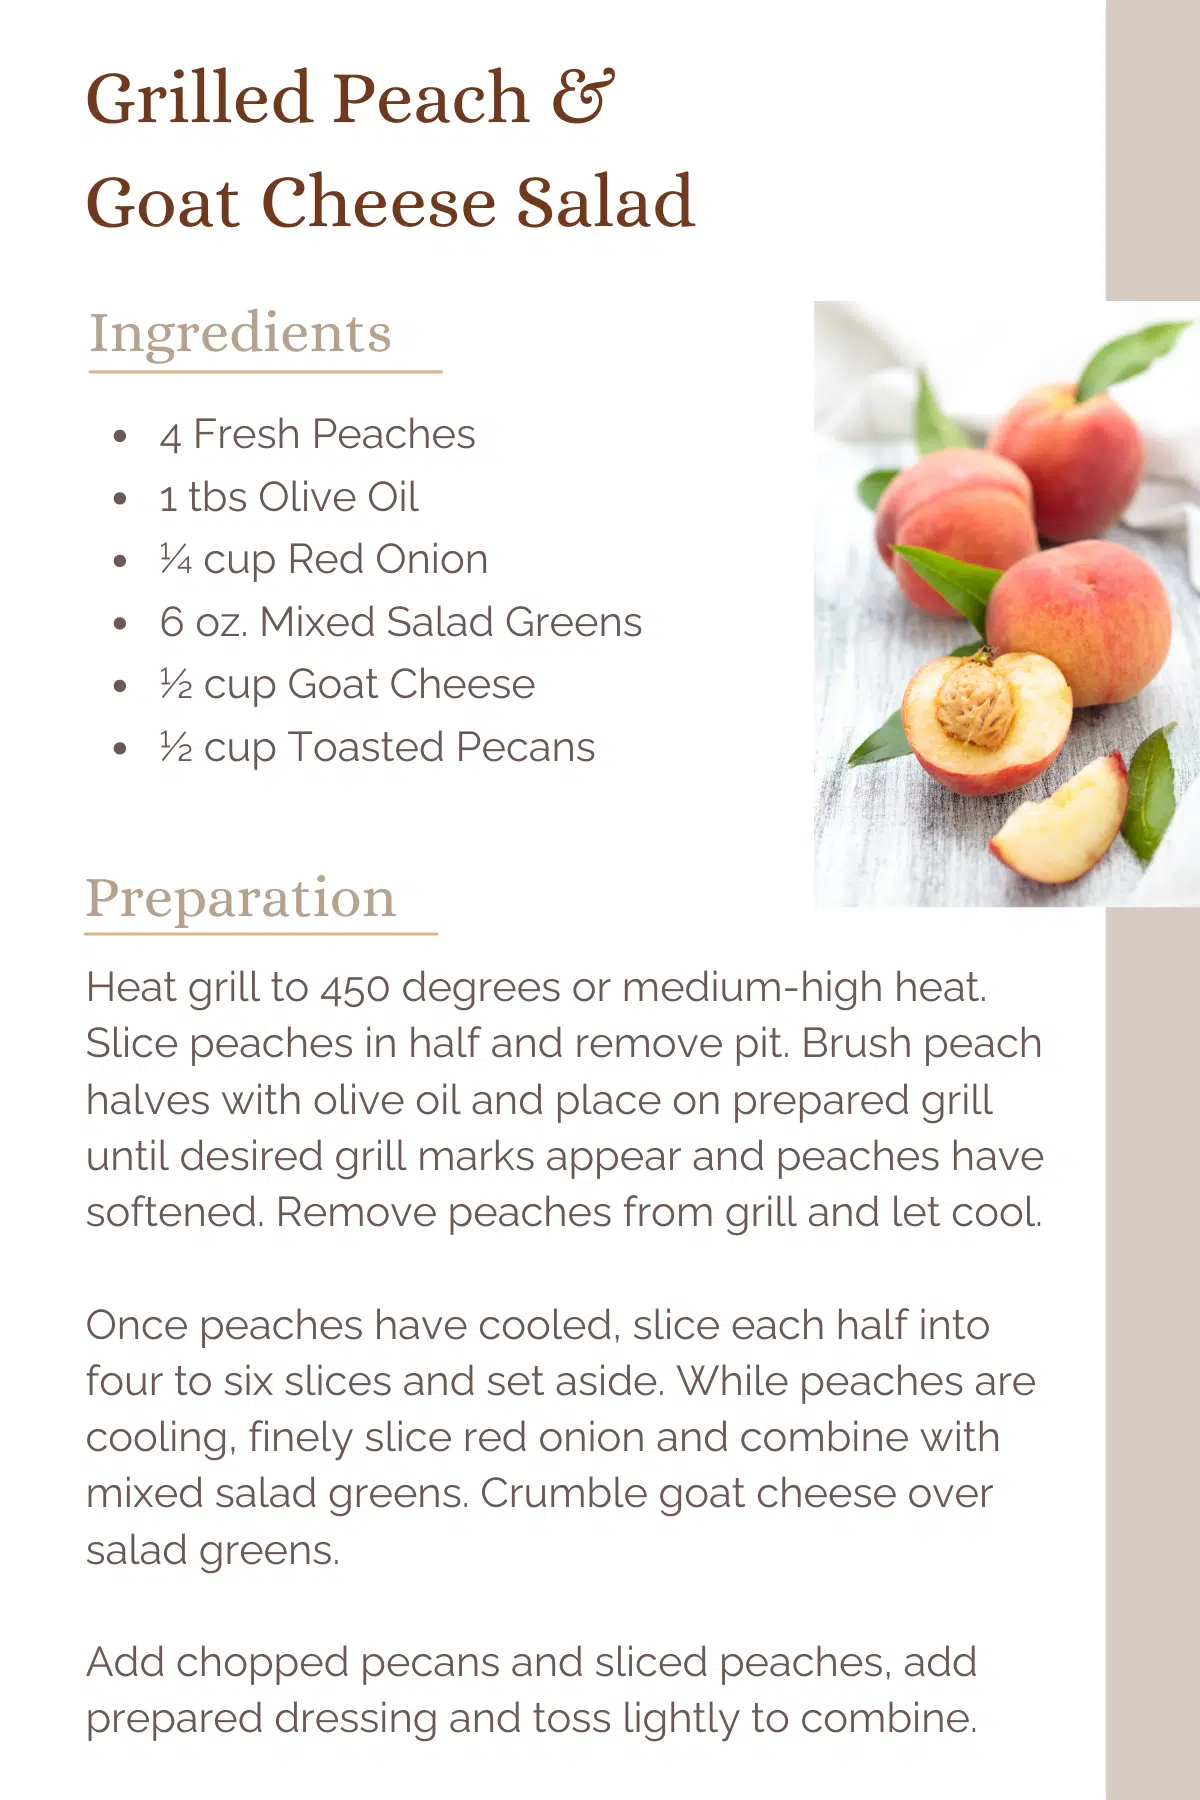 Recipe card for Grilled Peach and Goat Cheese Salad